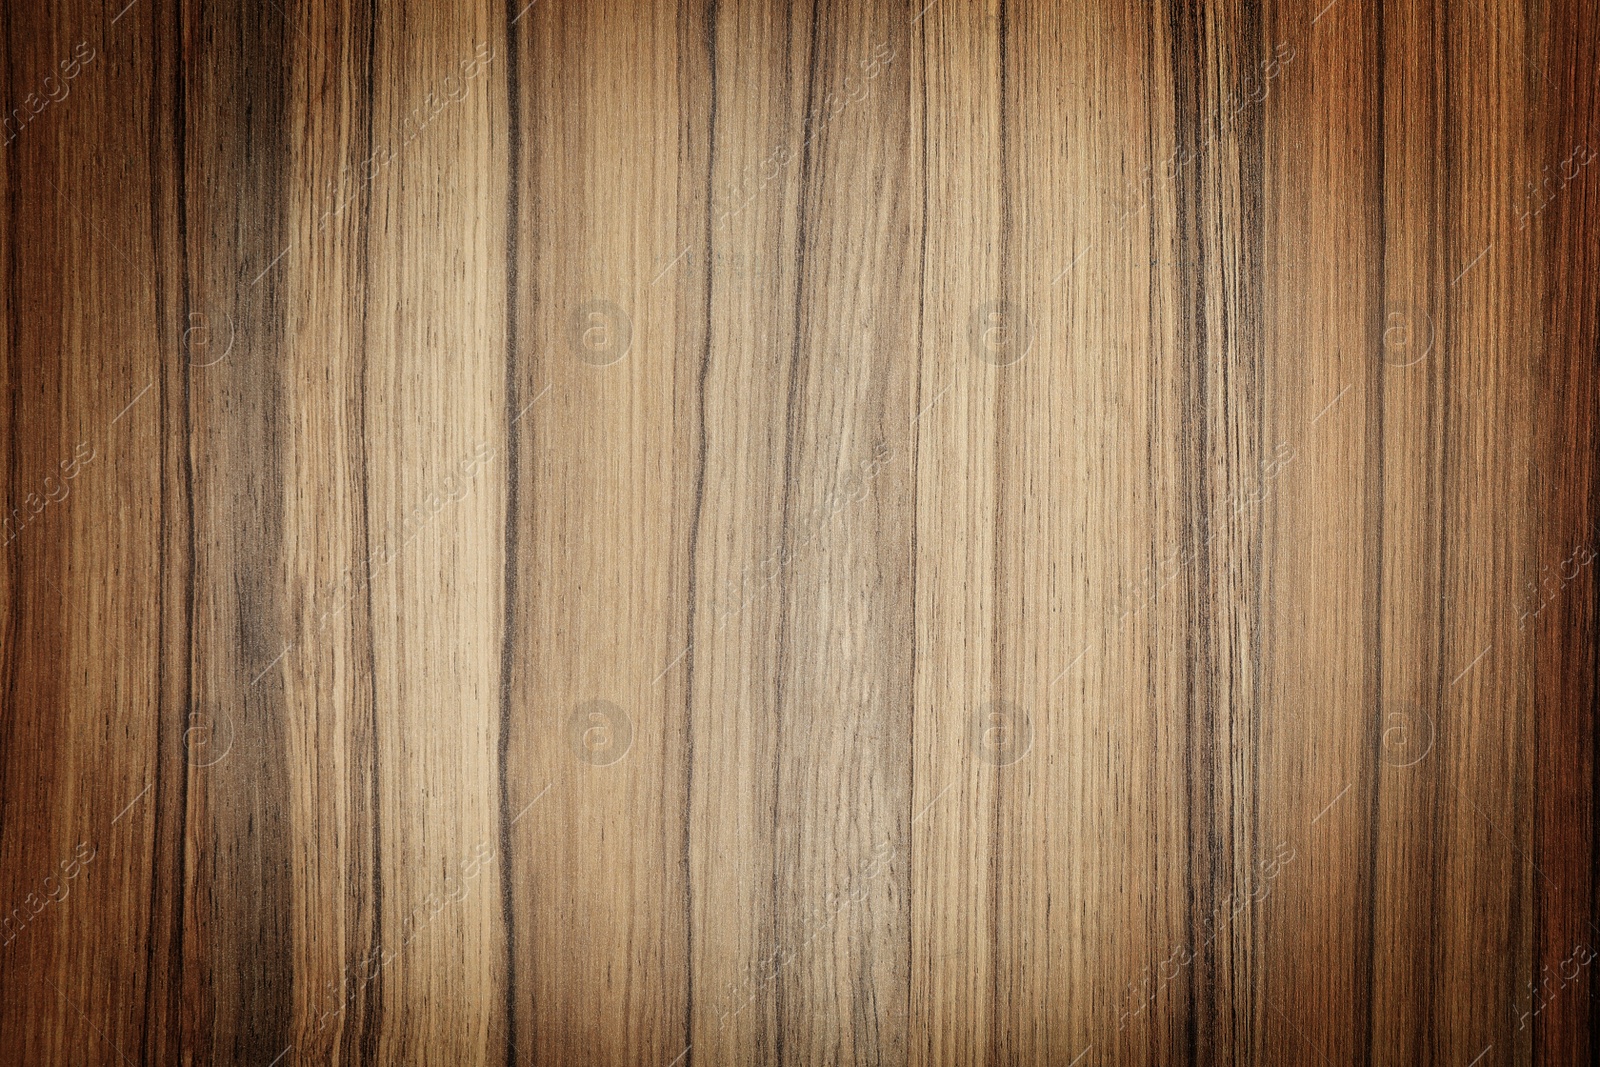 Image of Texture of wooden surface as background, top view